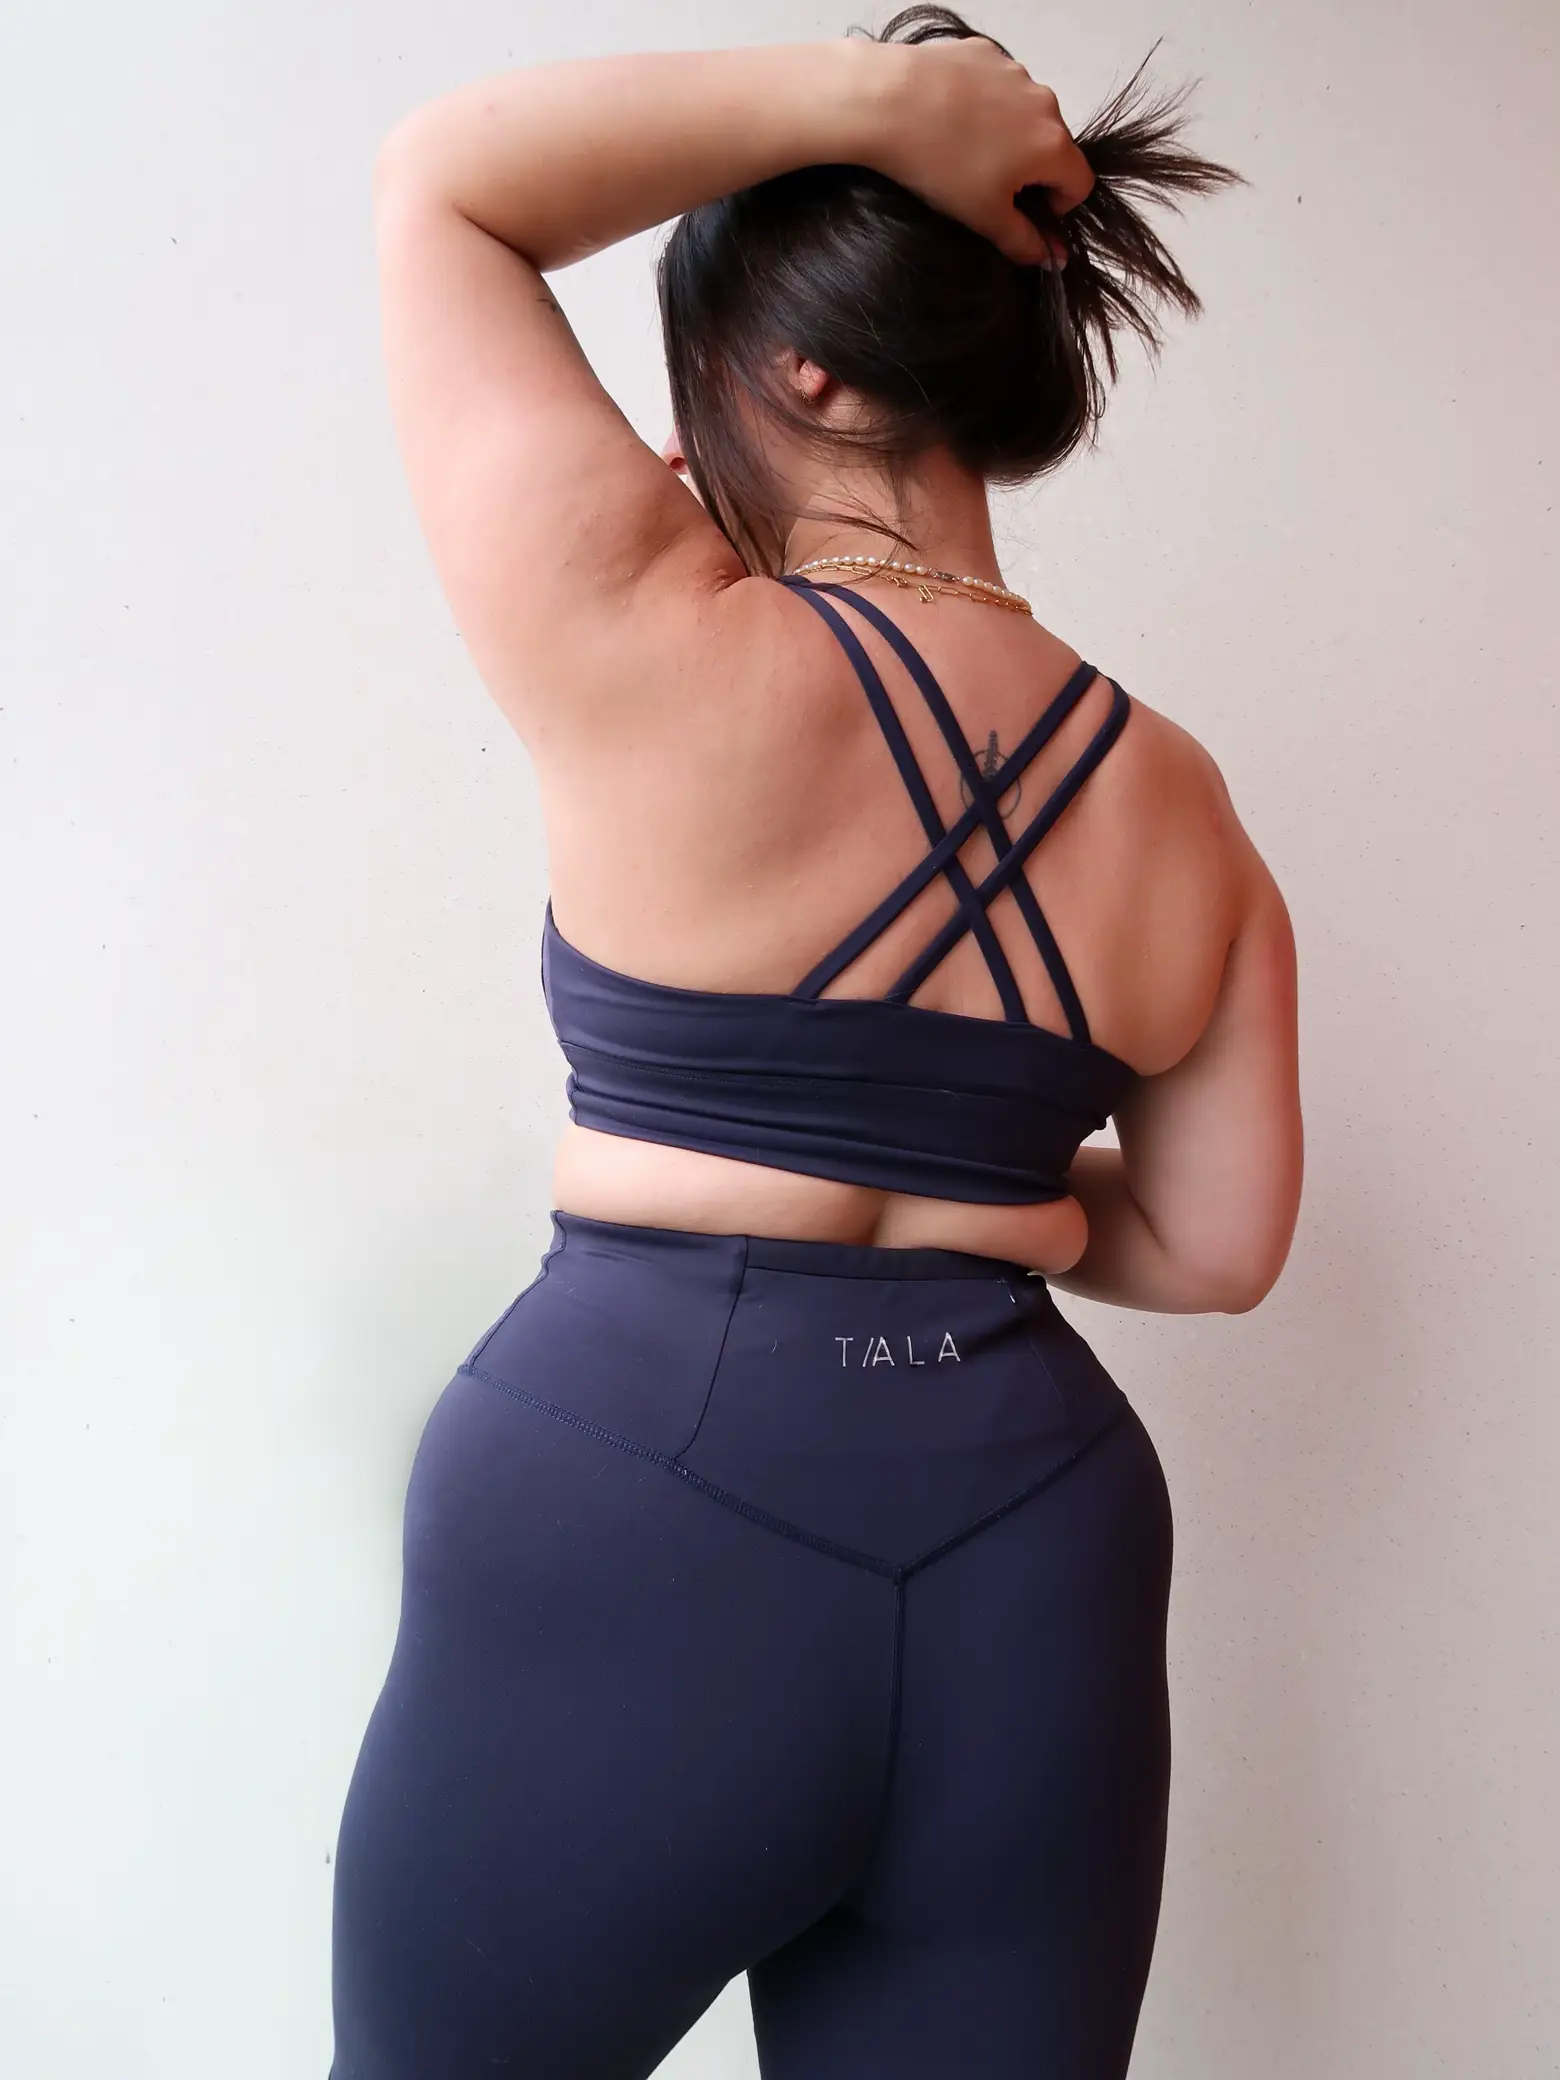 Tomorrow: Your new favorite booty-shaping leggings - Paragon Fitwear